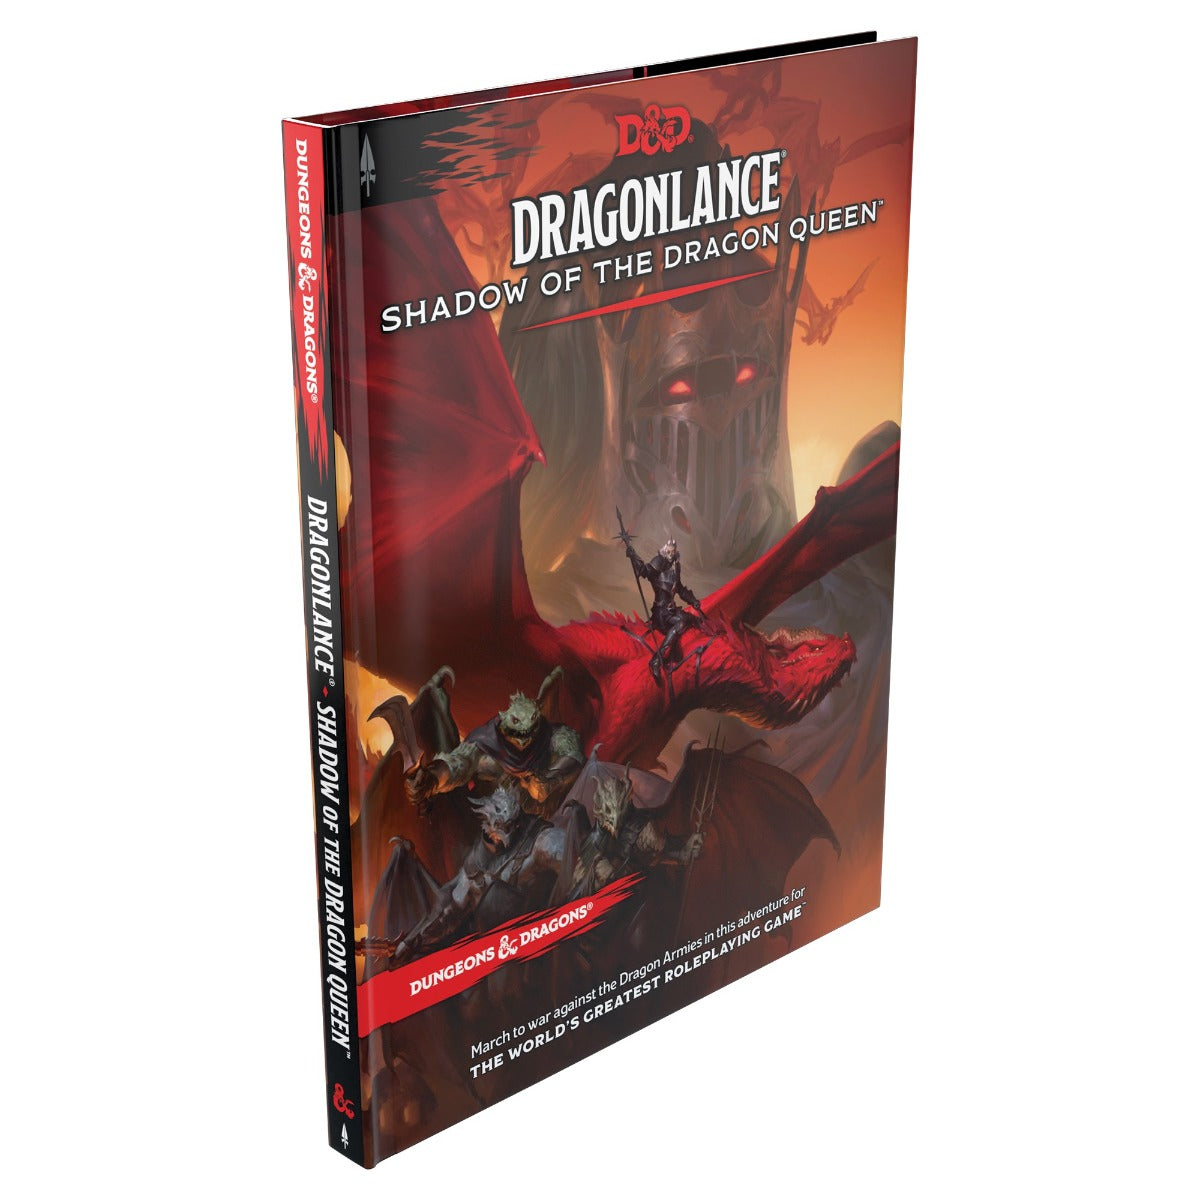 Dragonlance Shadow of the Dragon Queen - Dungeons & Dragons - 5E